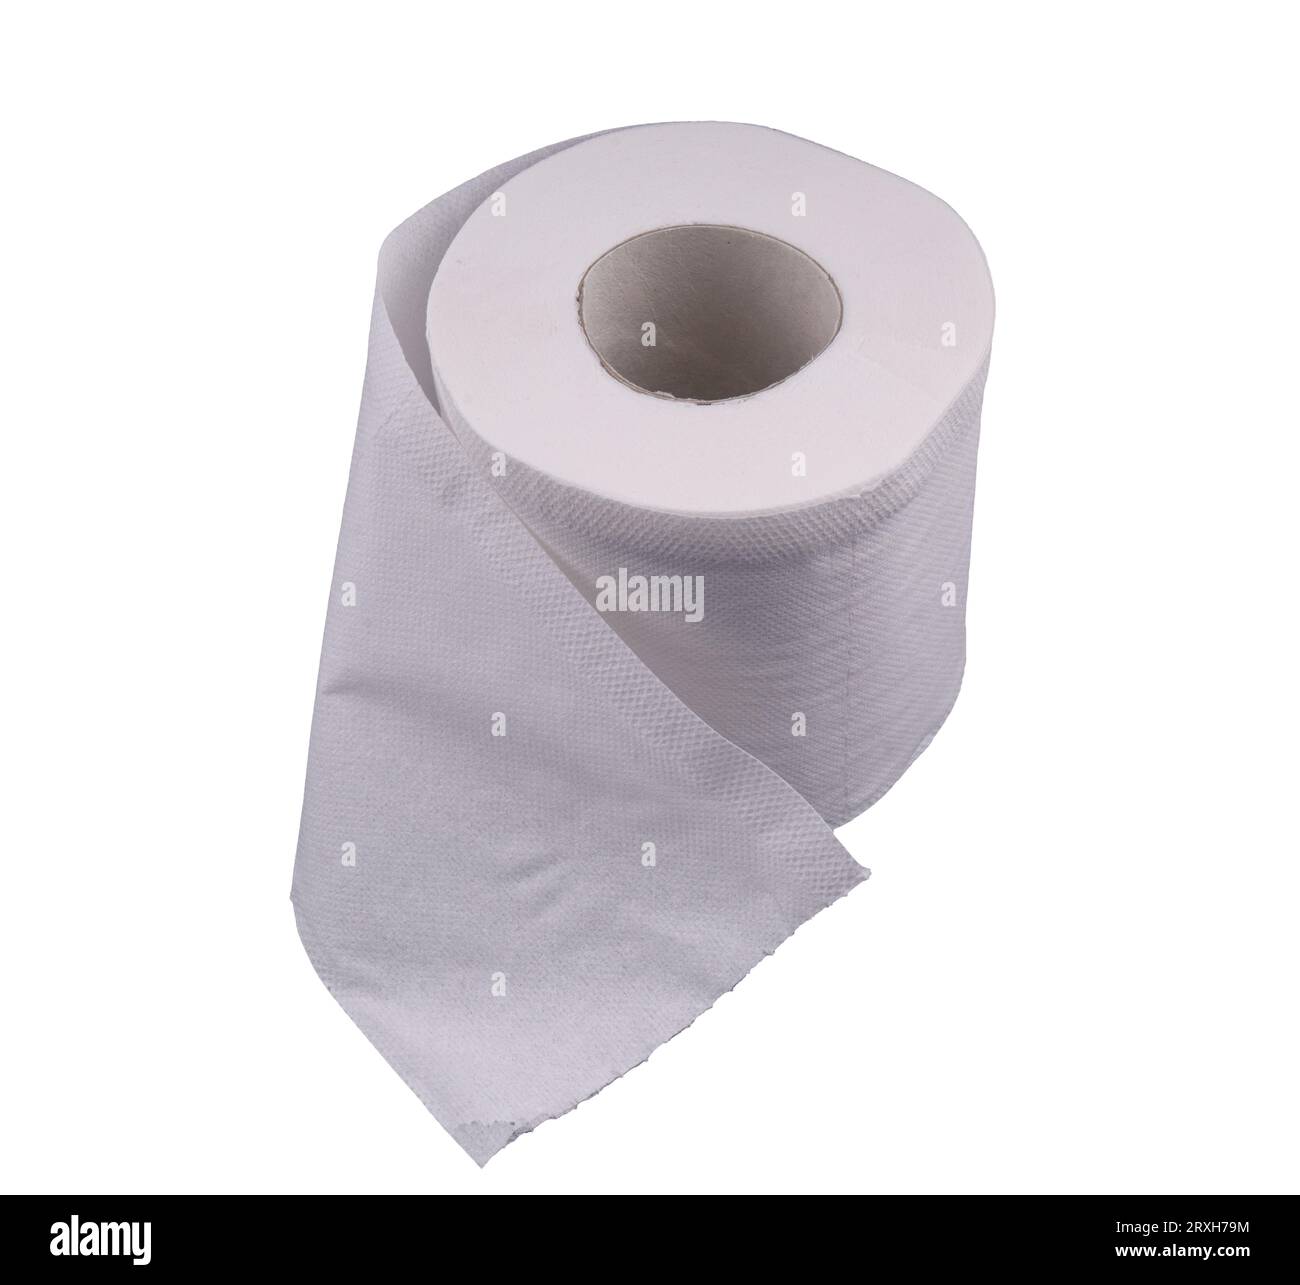 a roll of toilet paper on a transparent background Stock Photo